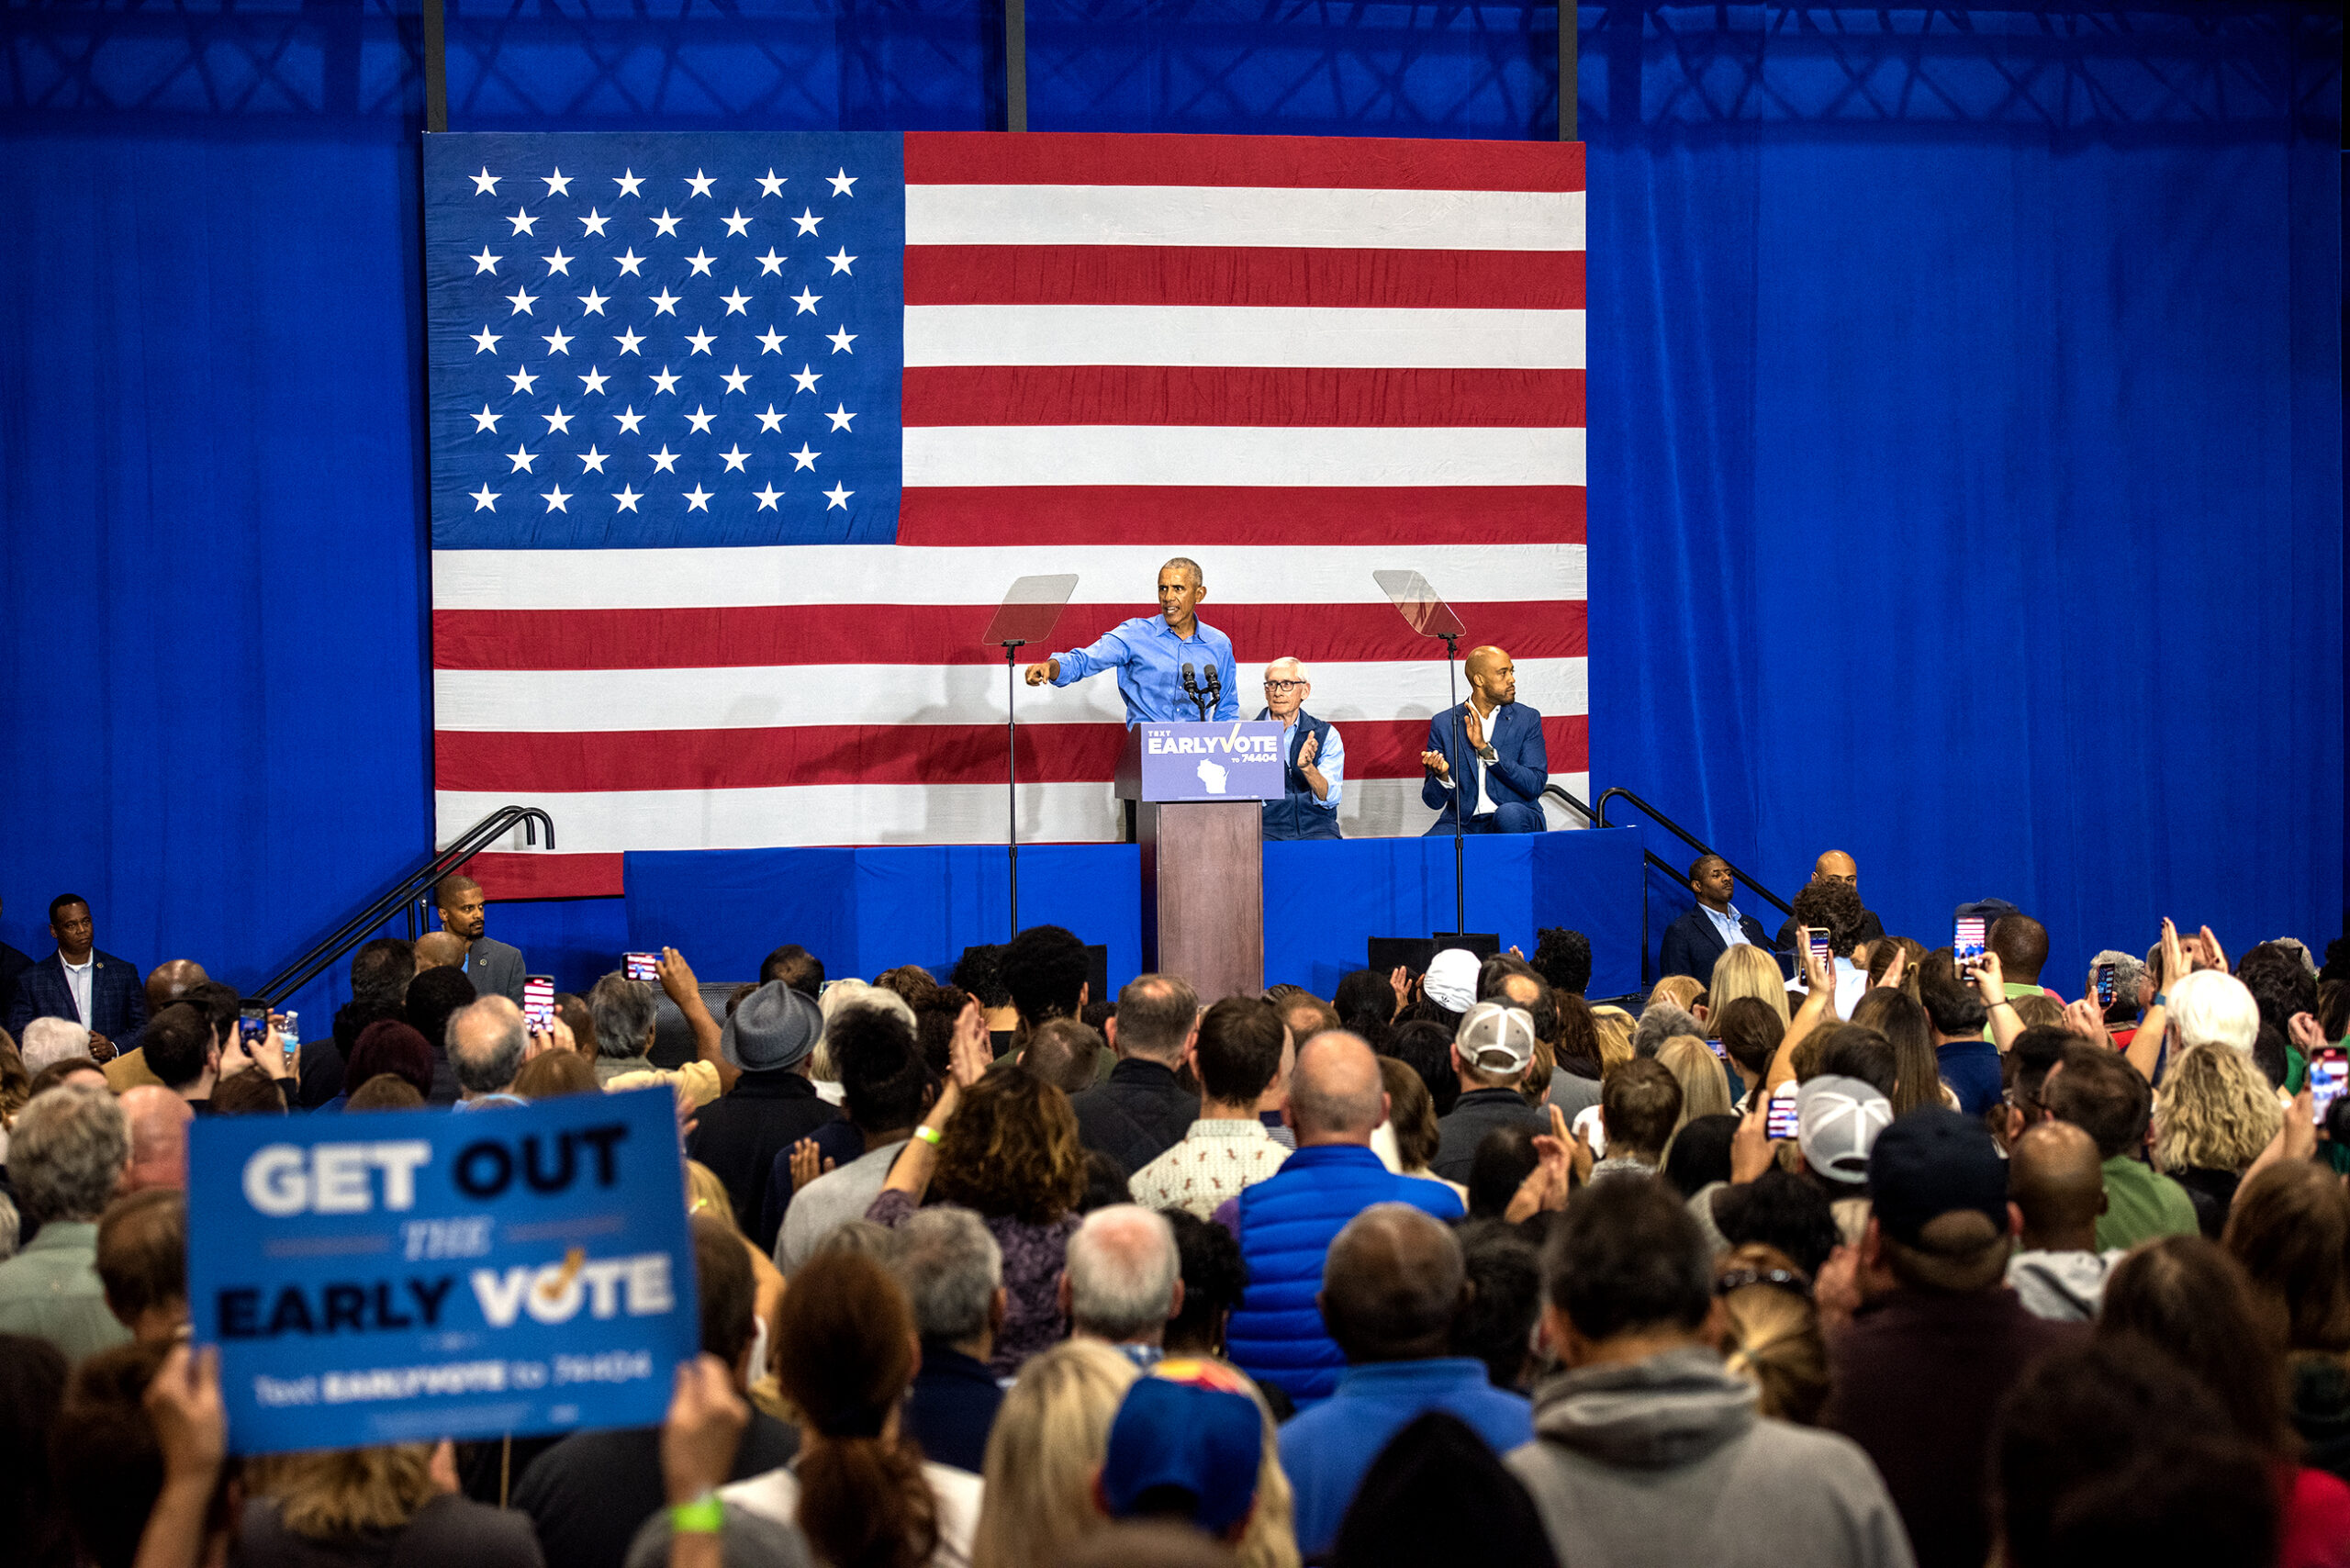 Former President Barack Obama stands in front of a large U.S. flag while he speaks in front of a sea of supporters.